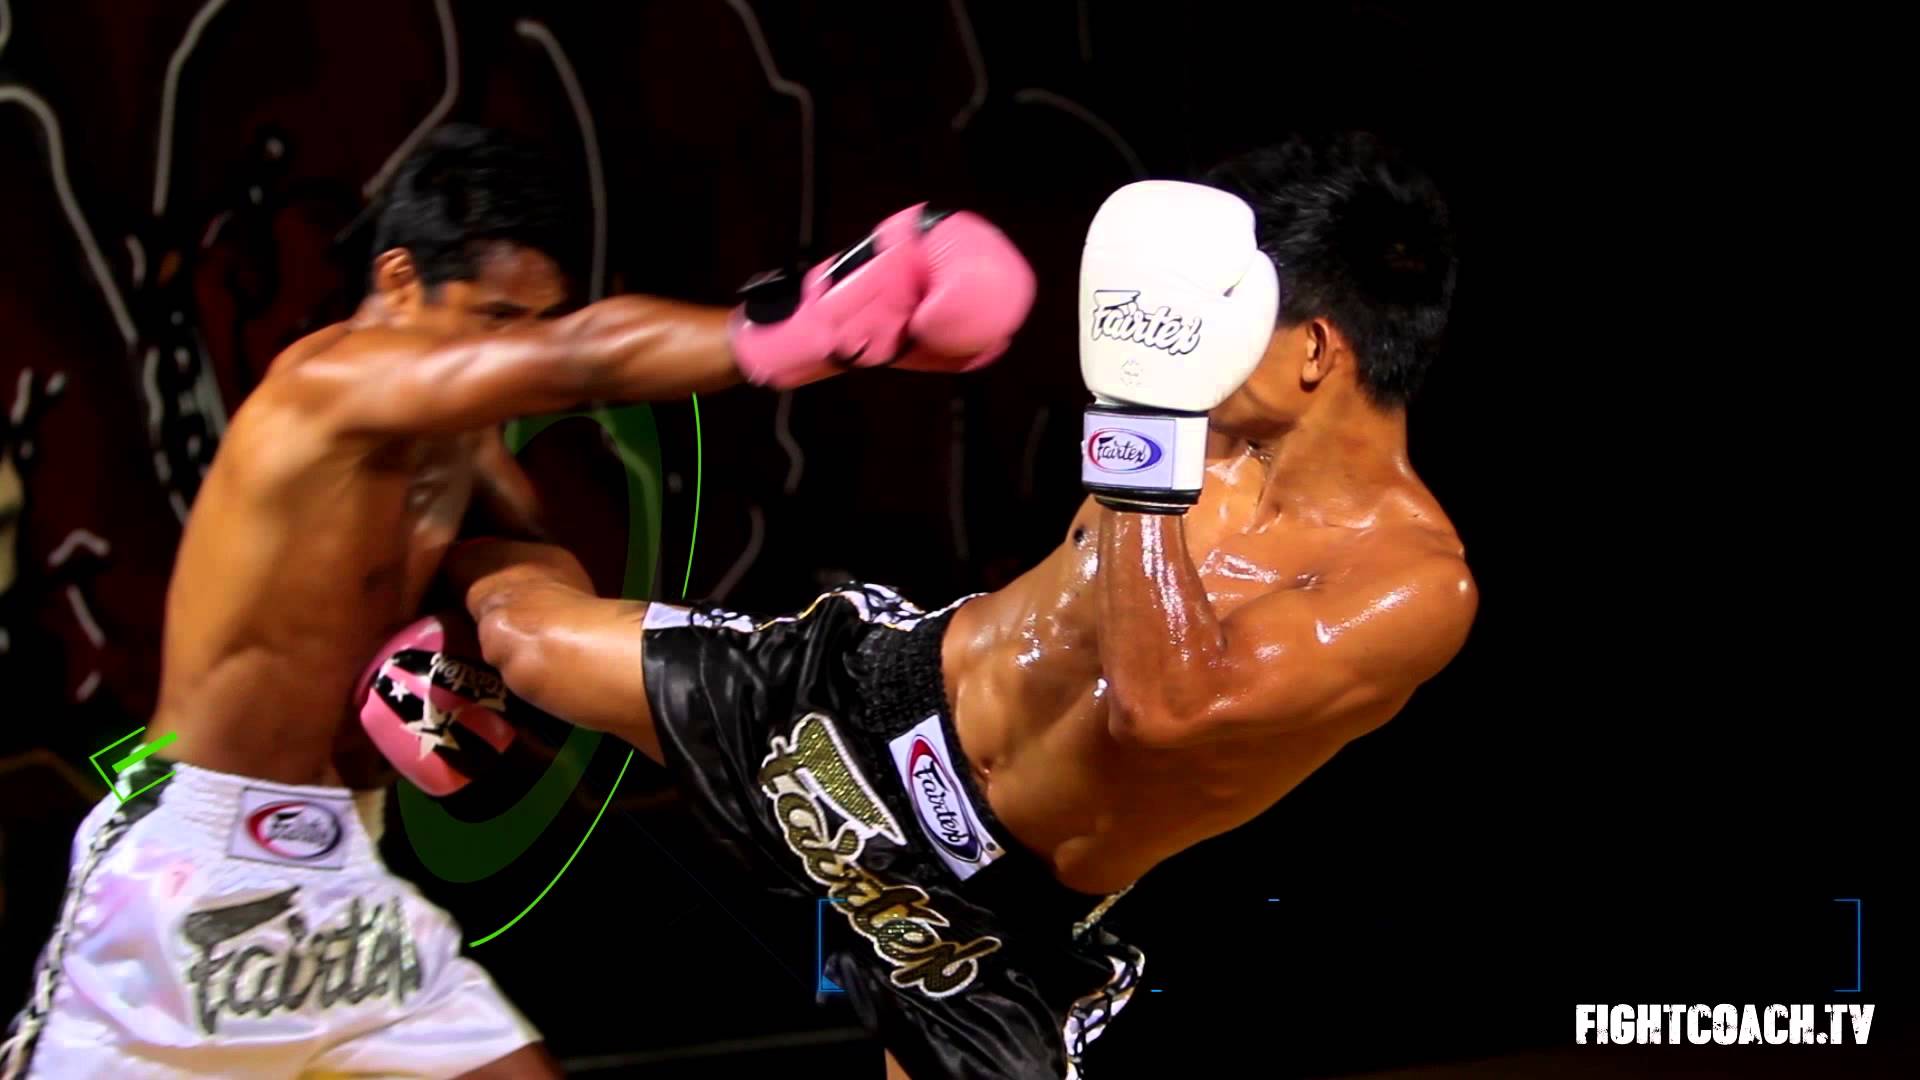 MUAY THAI: KICK CATCH, THROW AND COUNTER